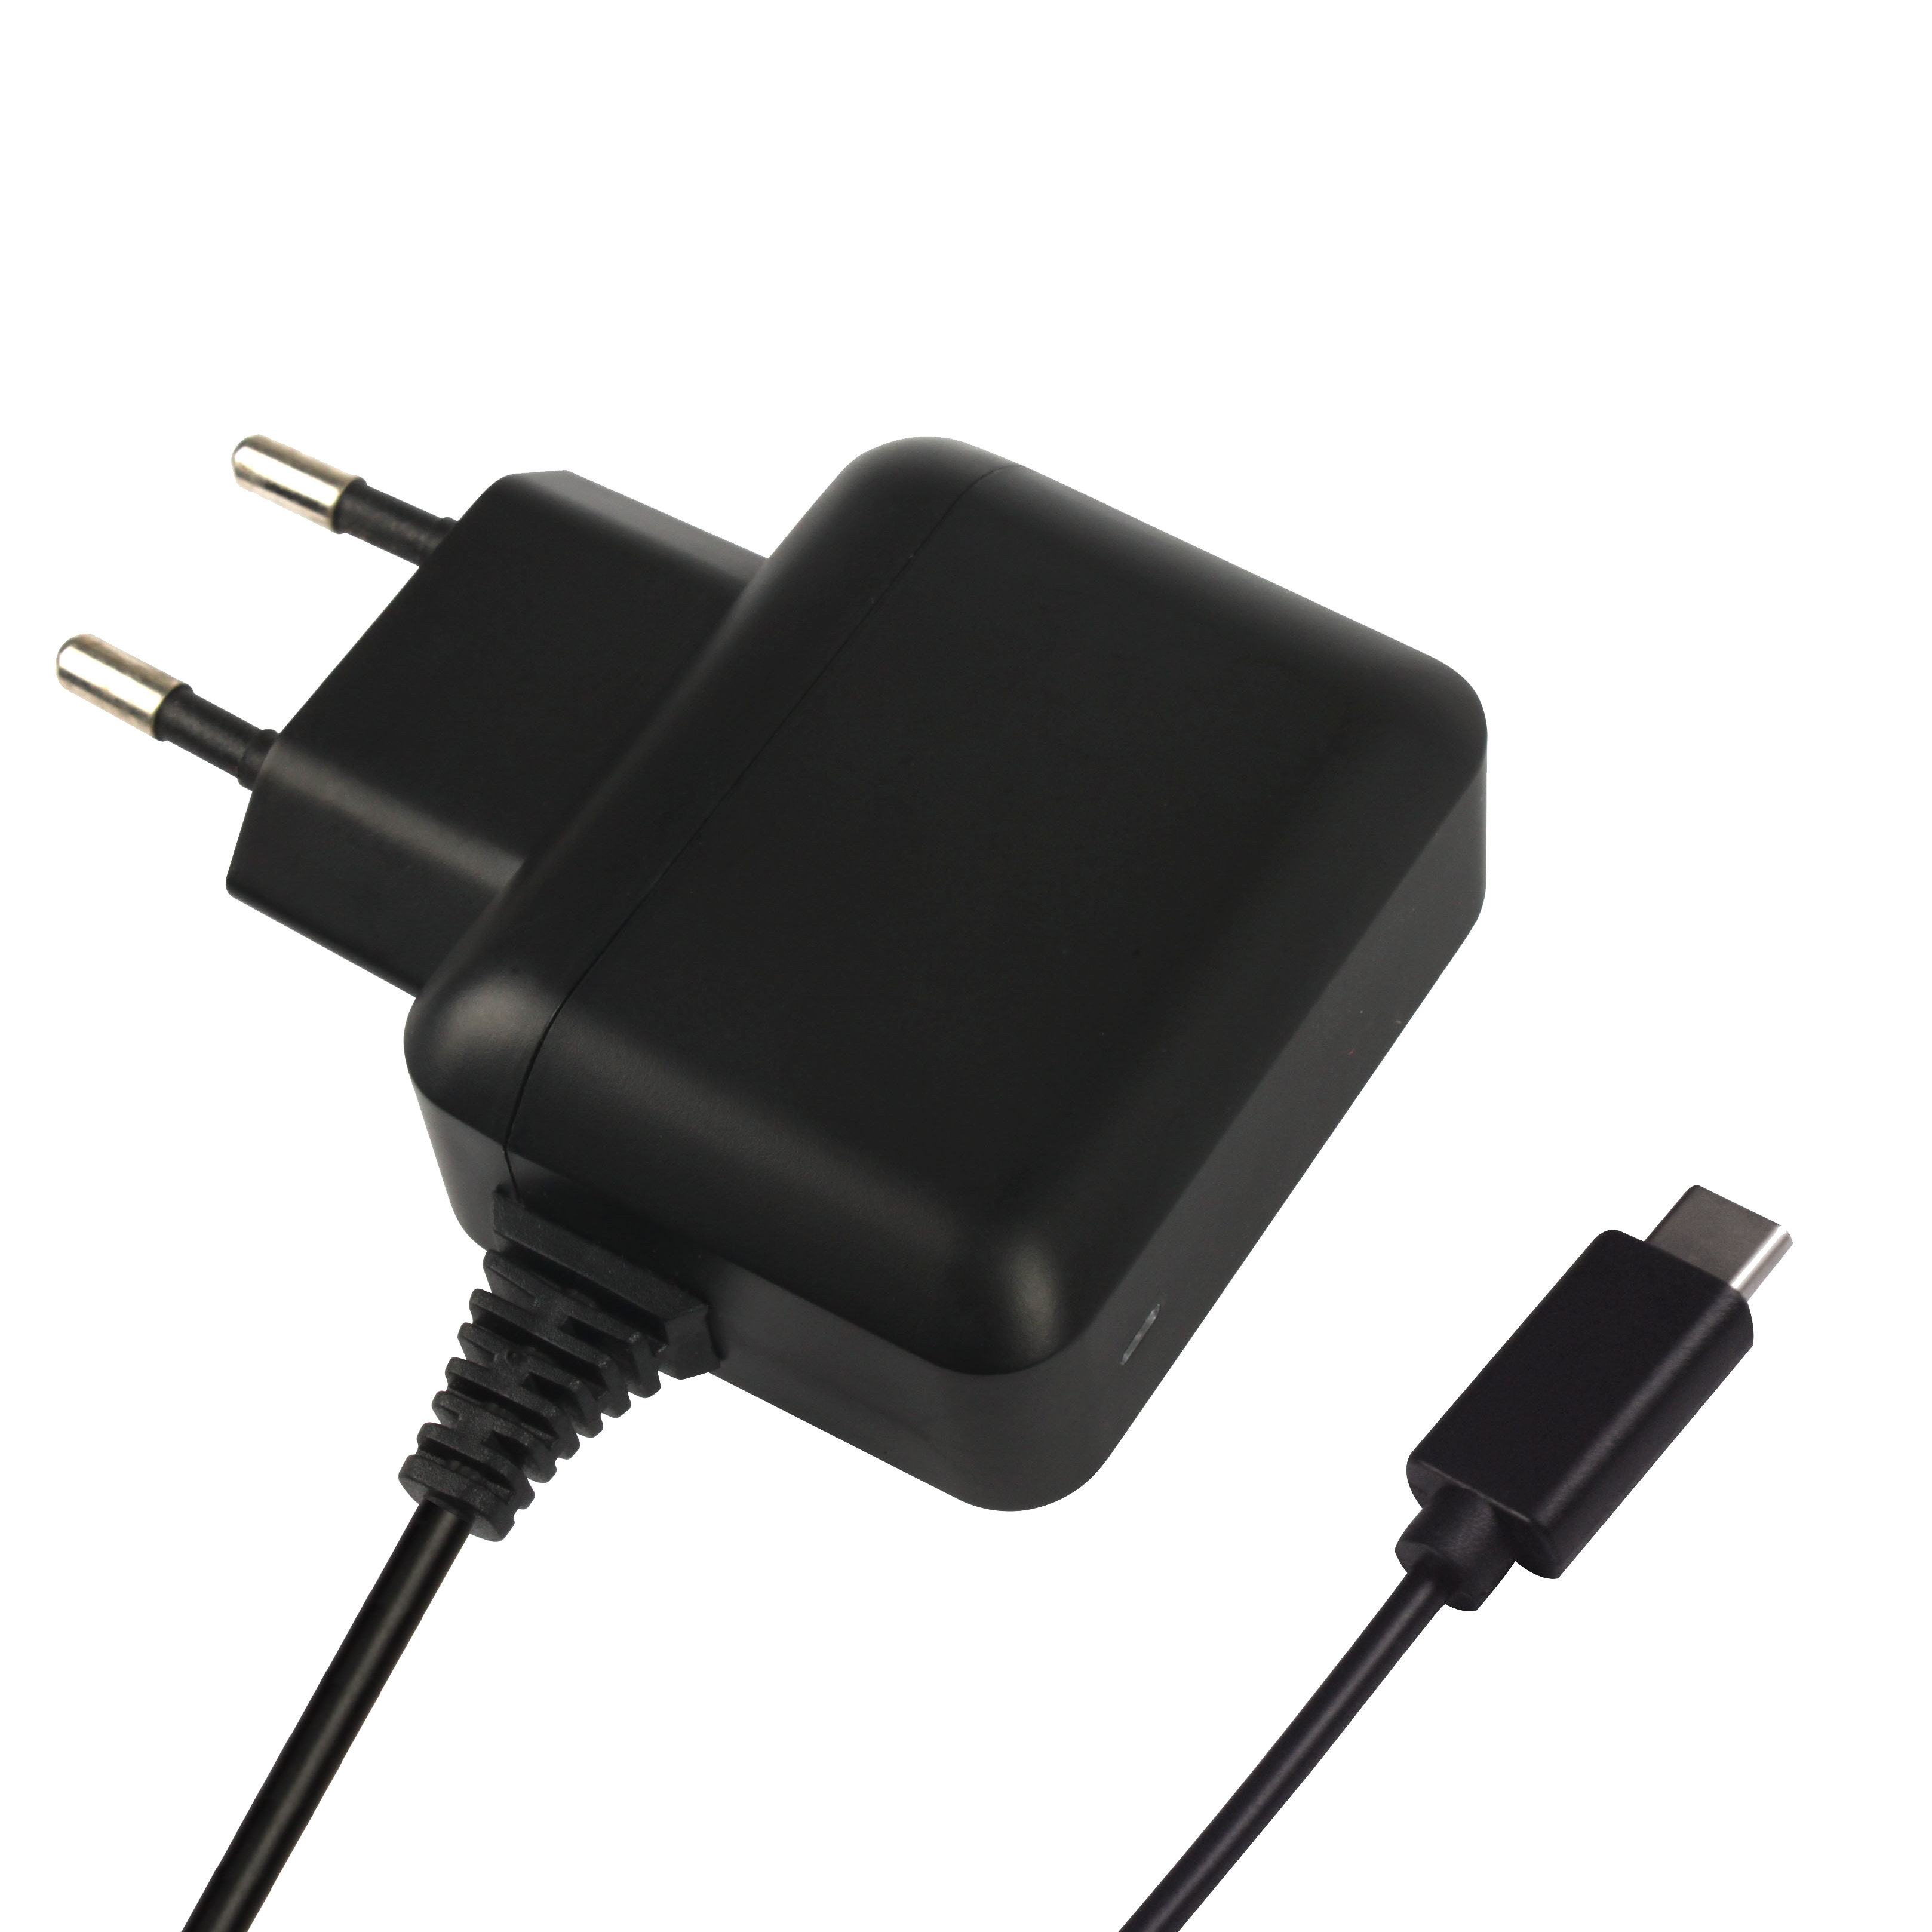 2GO 795732 mobile device charger Black Indoor